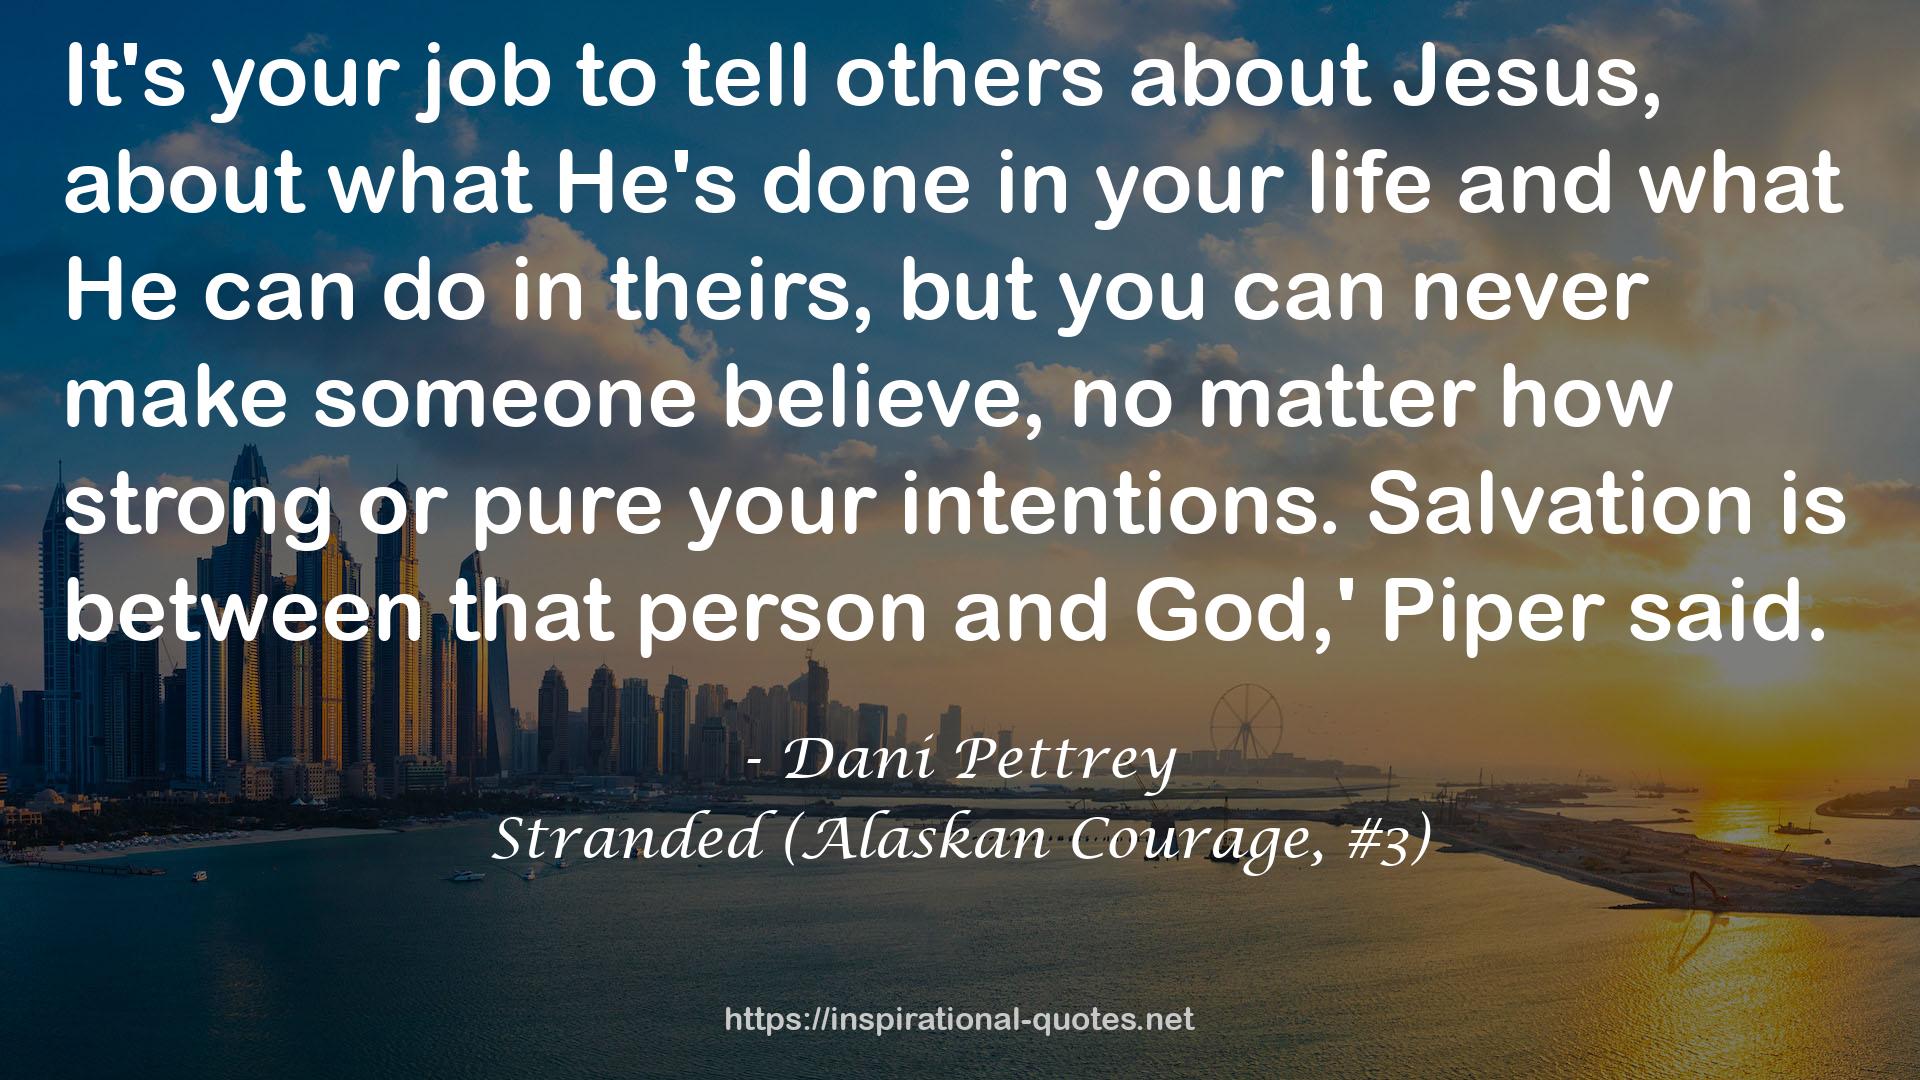 Stranded (Alaskan Courage, #3) QUOTES